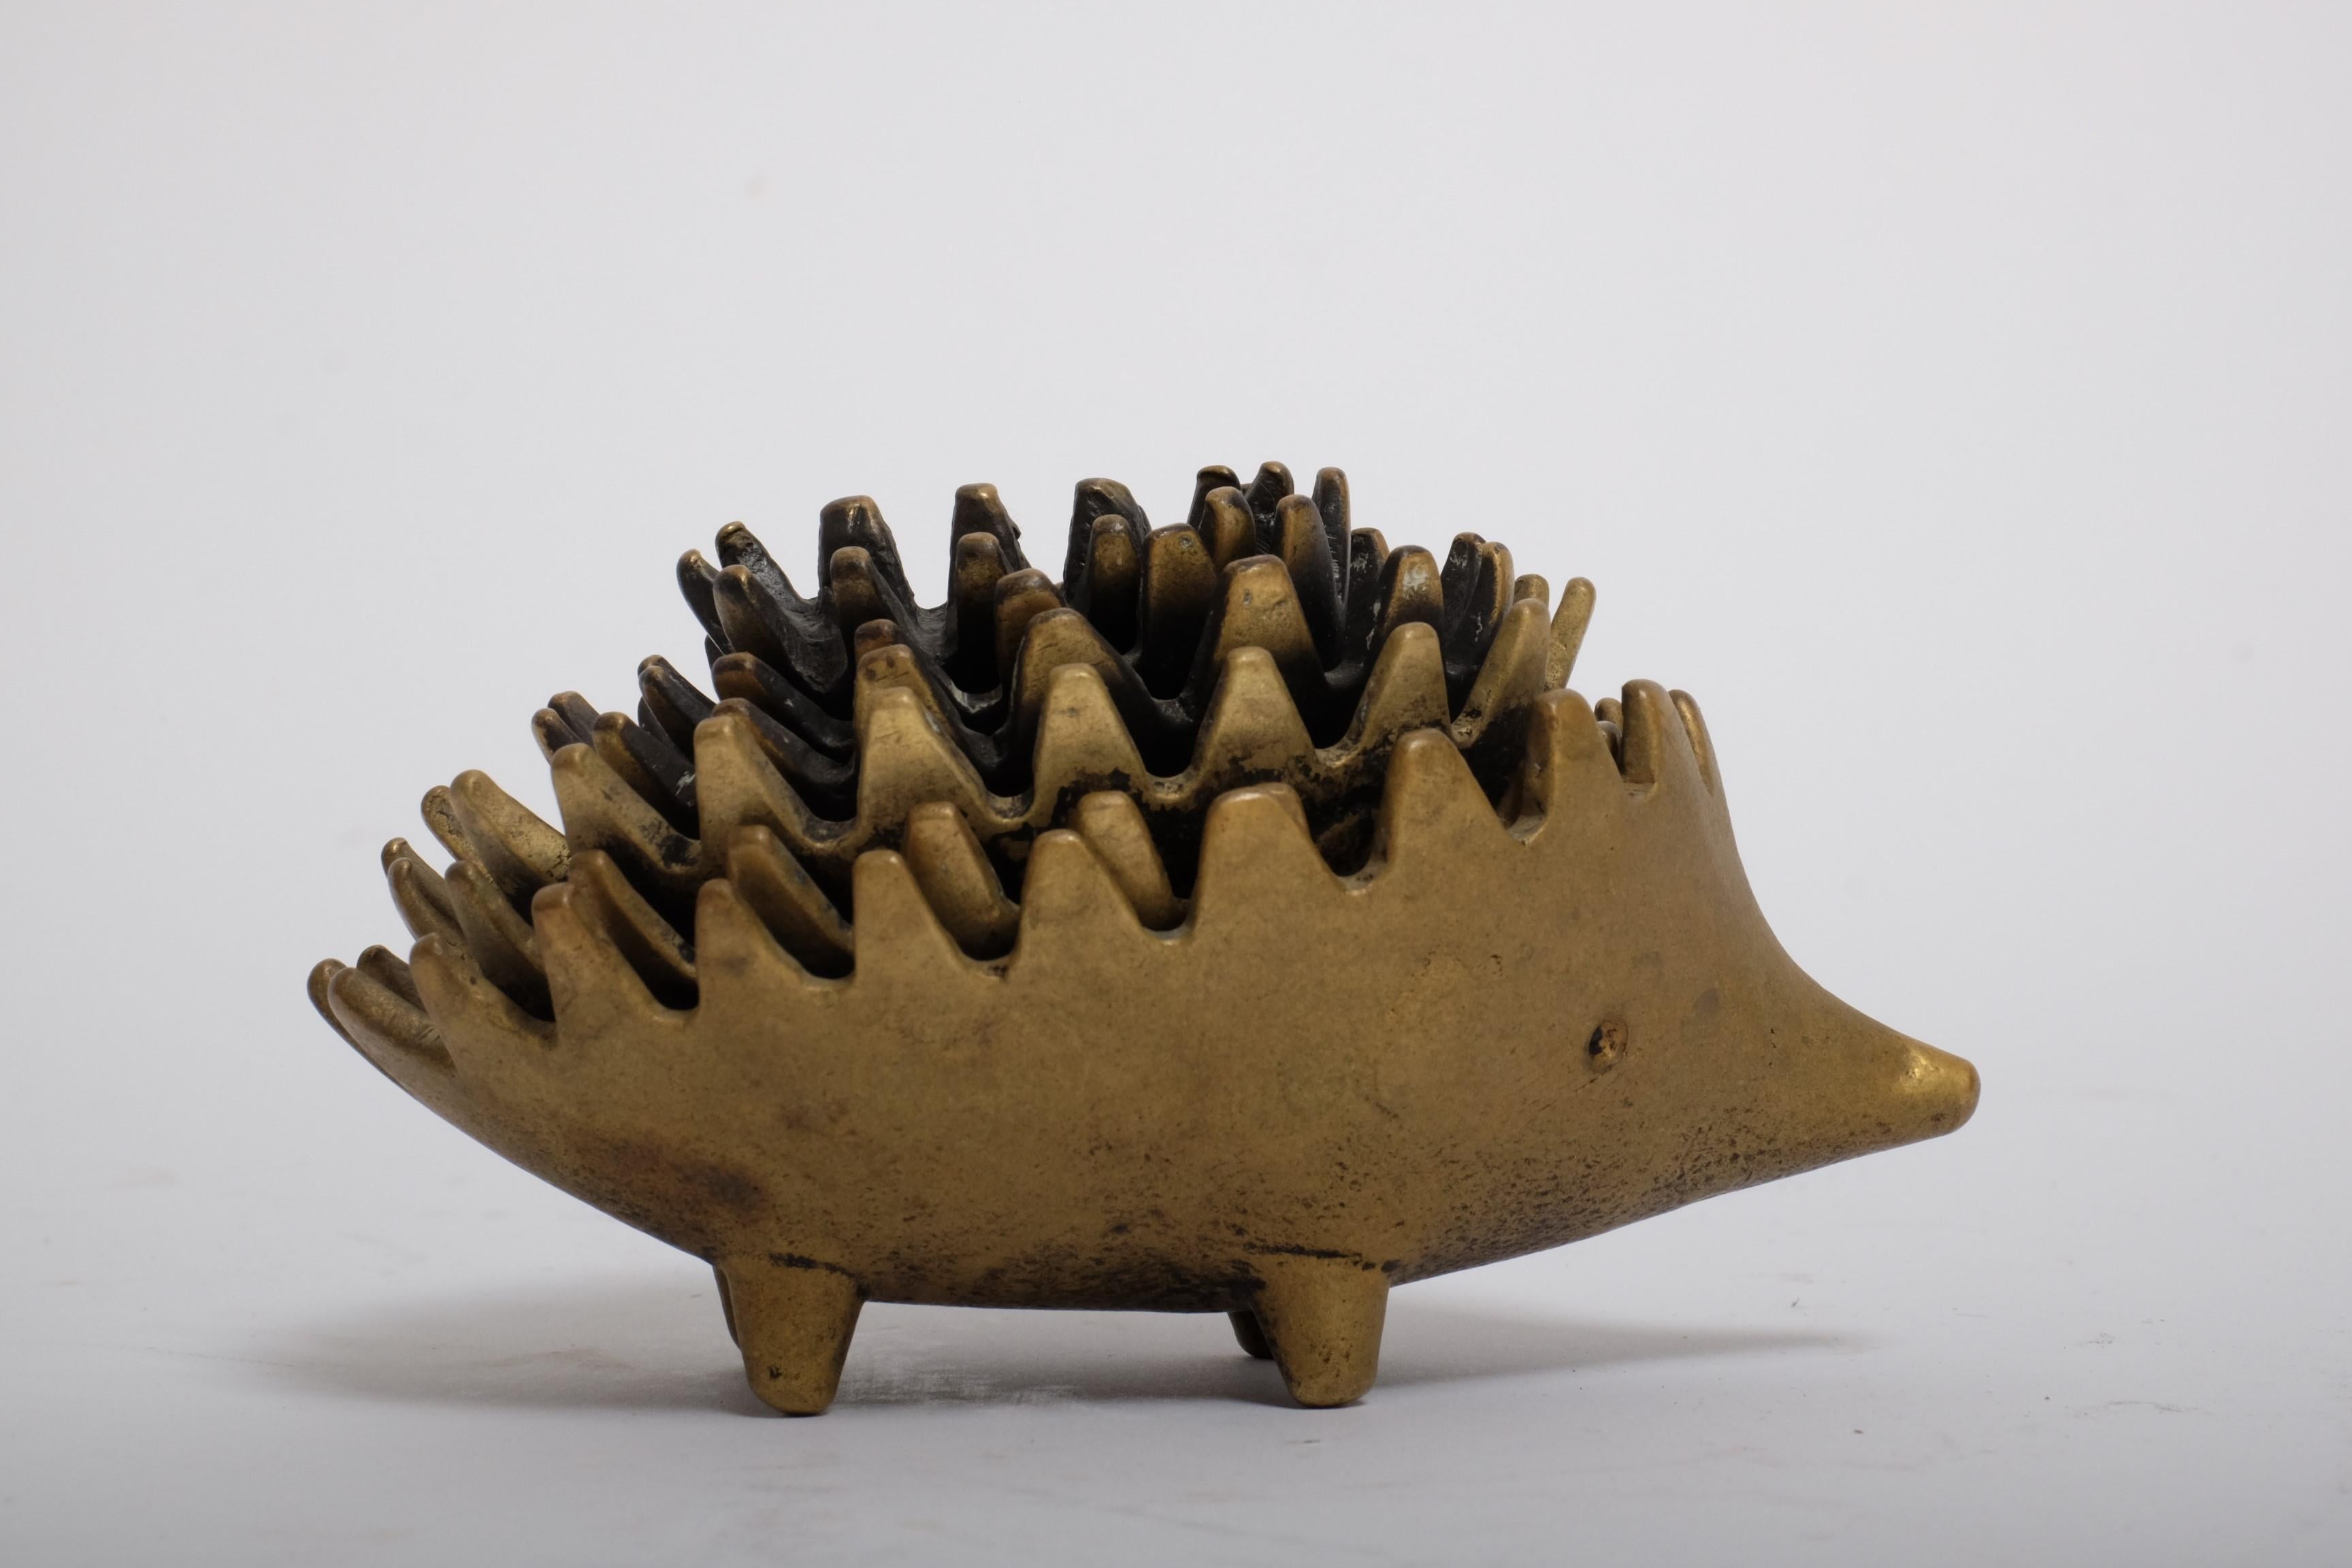 A complete set of six stackable mid-century hedgehog ashtrays.

Design by Walter Bosse. Executed by Hertha Baller, Austria in the 1950s.

Made from brass. Version with three light and three dark hedgehogs.

In good condition with nice patina.